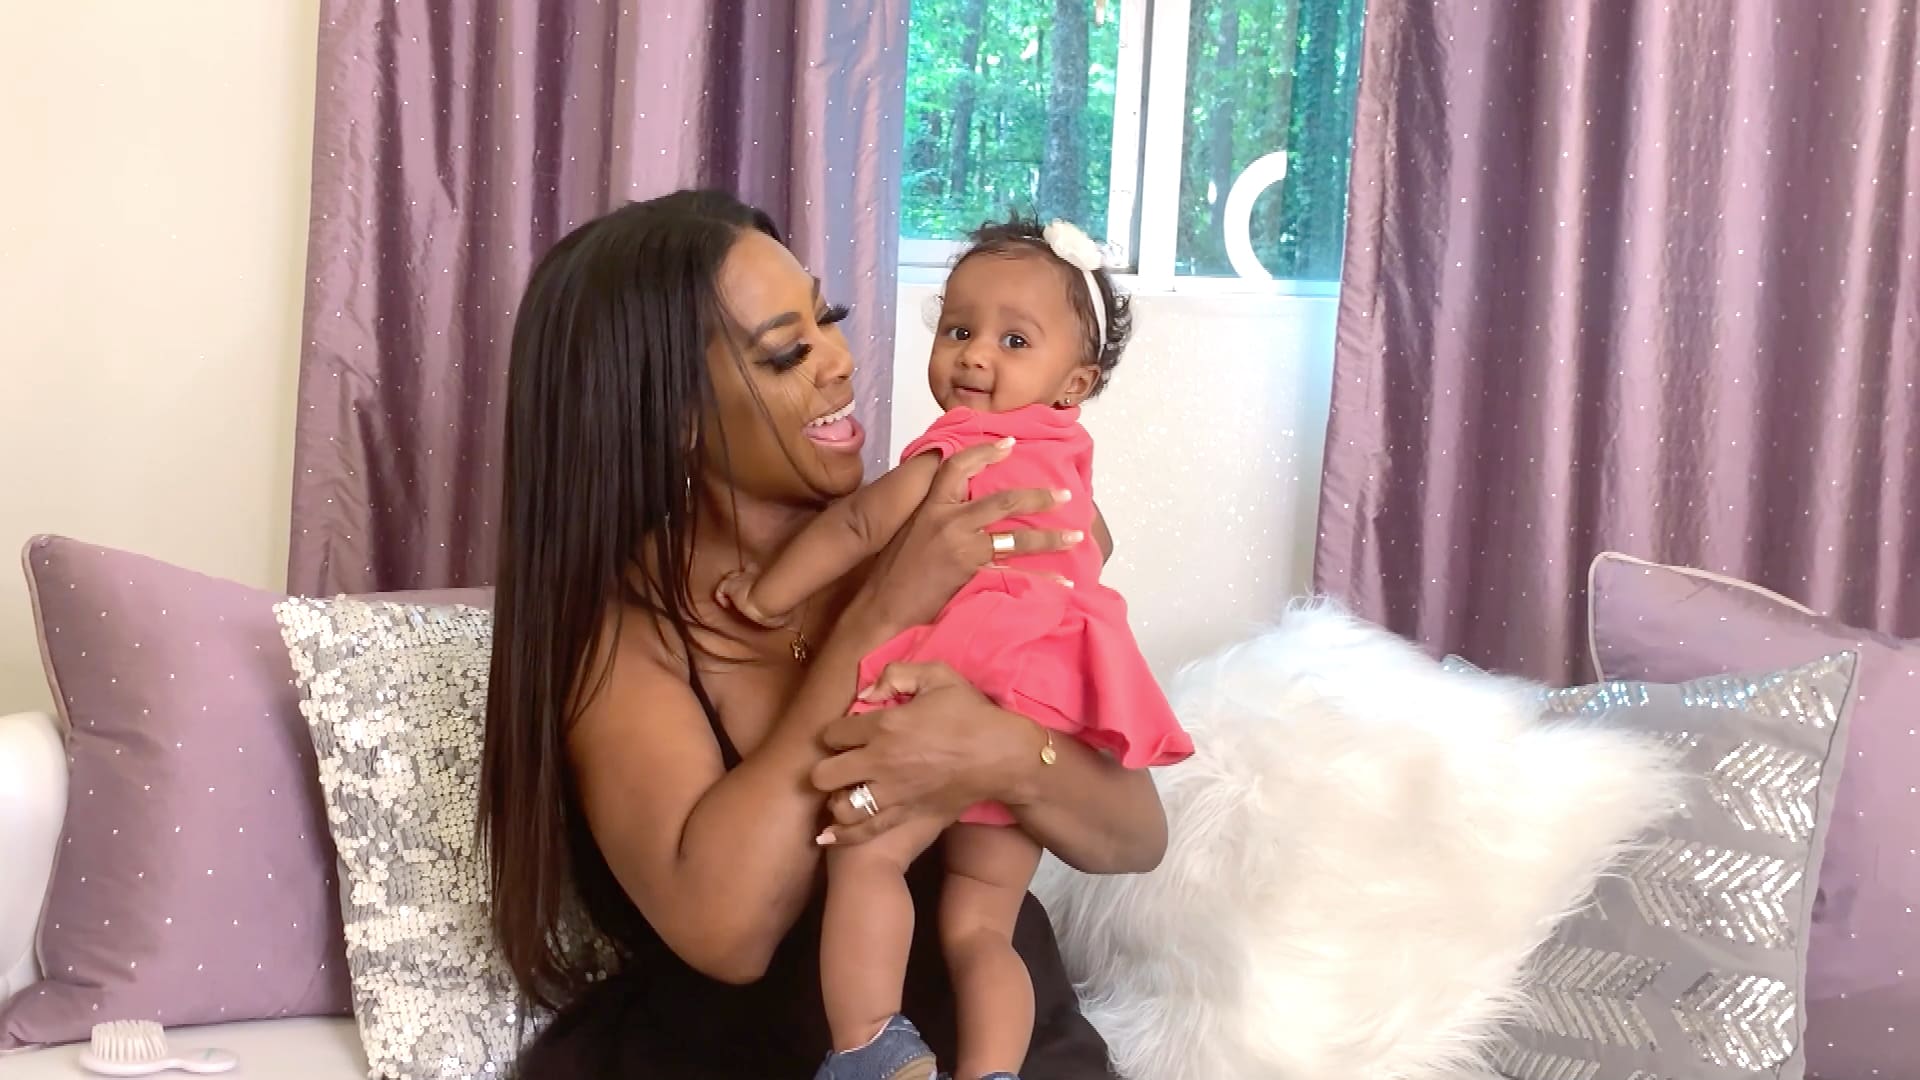 Kenya Moore's Brooklyn Daly Makes Fans Happy With A New Photo